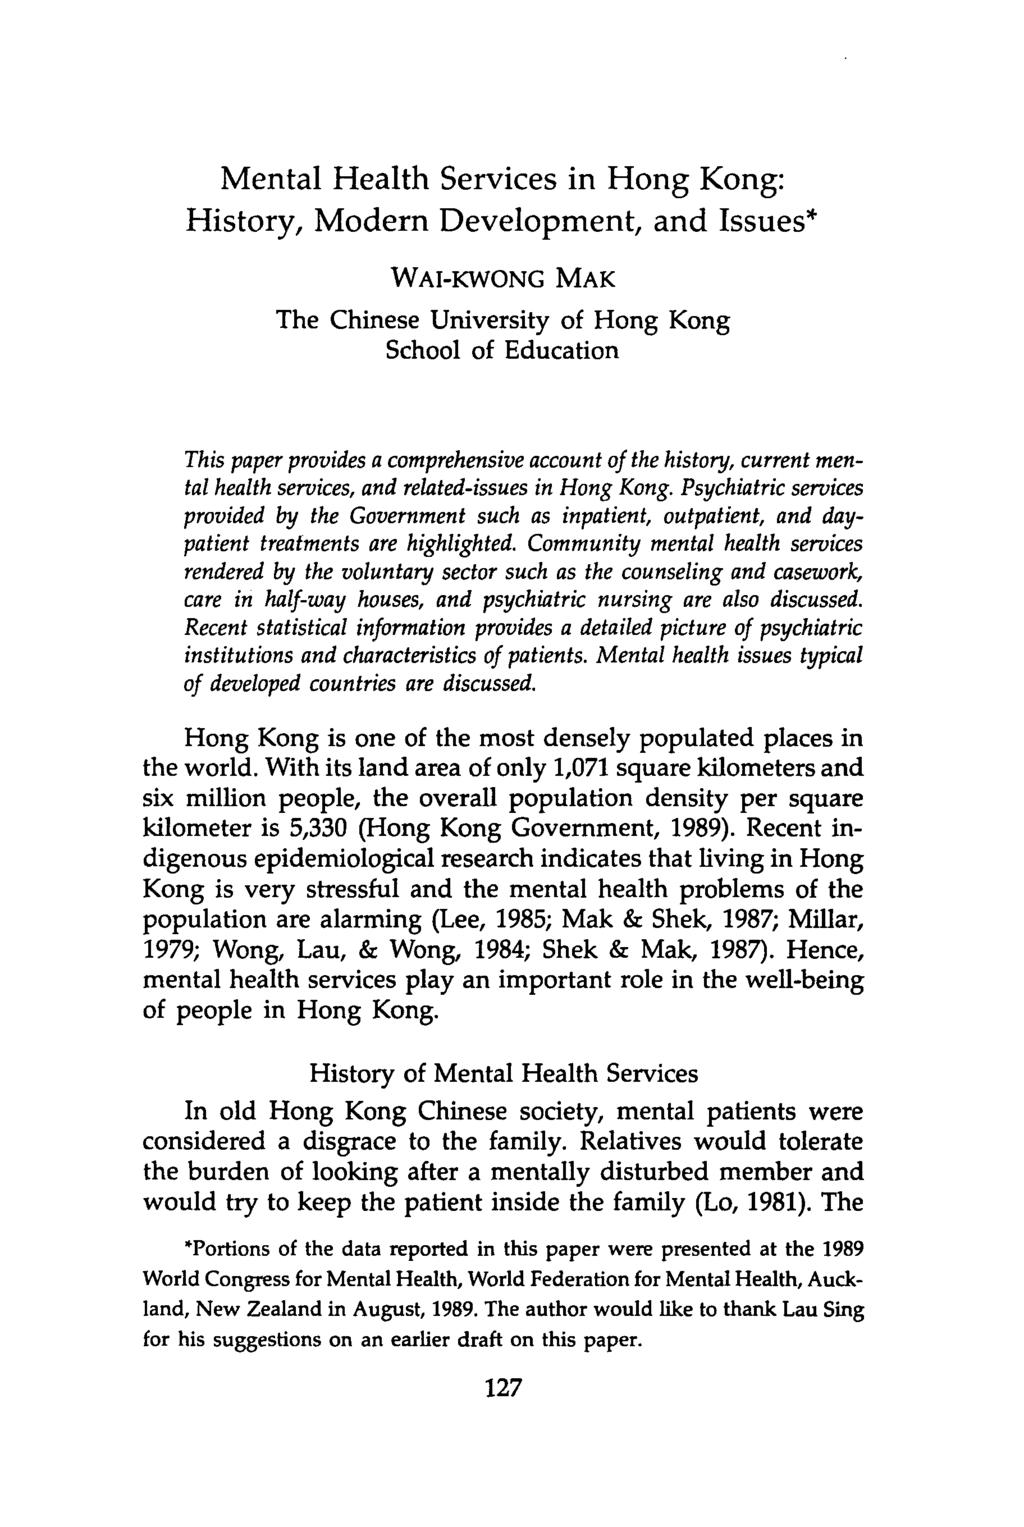 Mental Health Services in Hong Kong: History, Modern Development, and Issues* WAI-KWONG MAK The Chinese University of Hong Kong School of Education This paper provides a comprehensive account of the